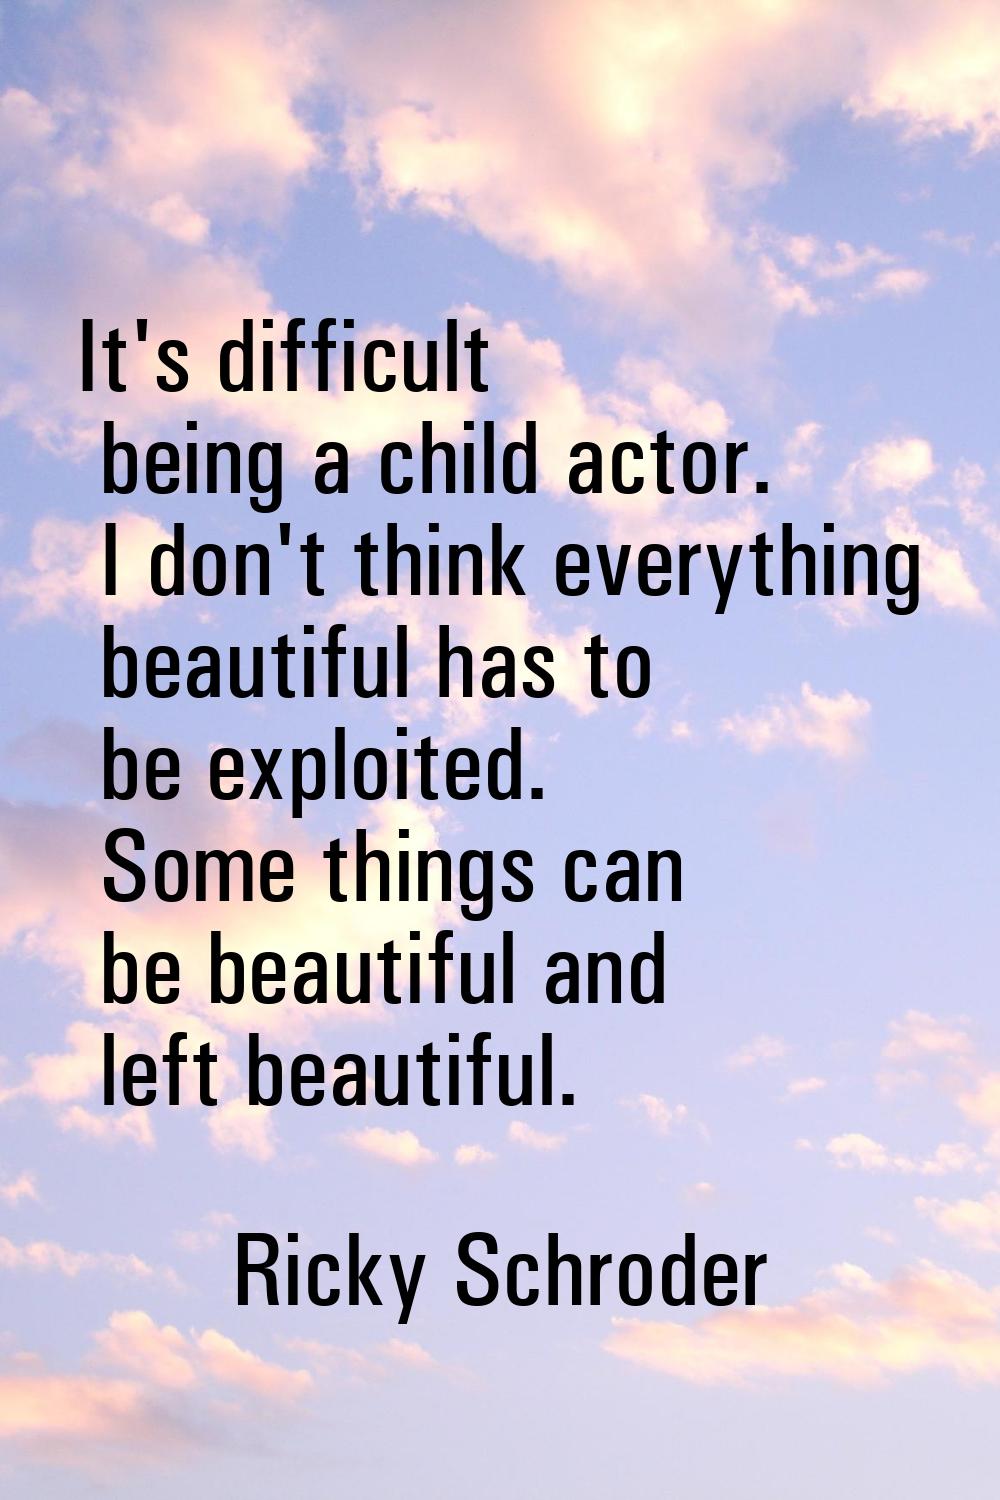 It's difficult being a child actor. I don't think everything beautiful has to be exploited. Some th